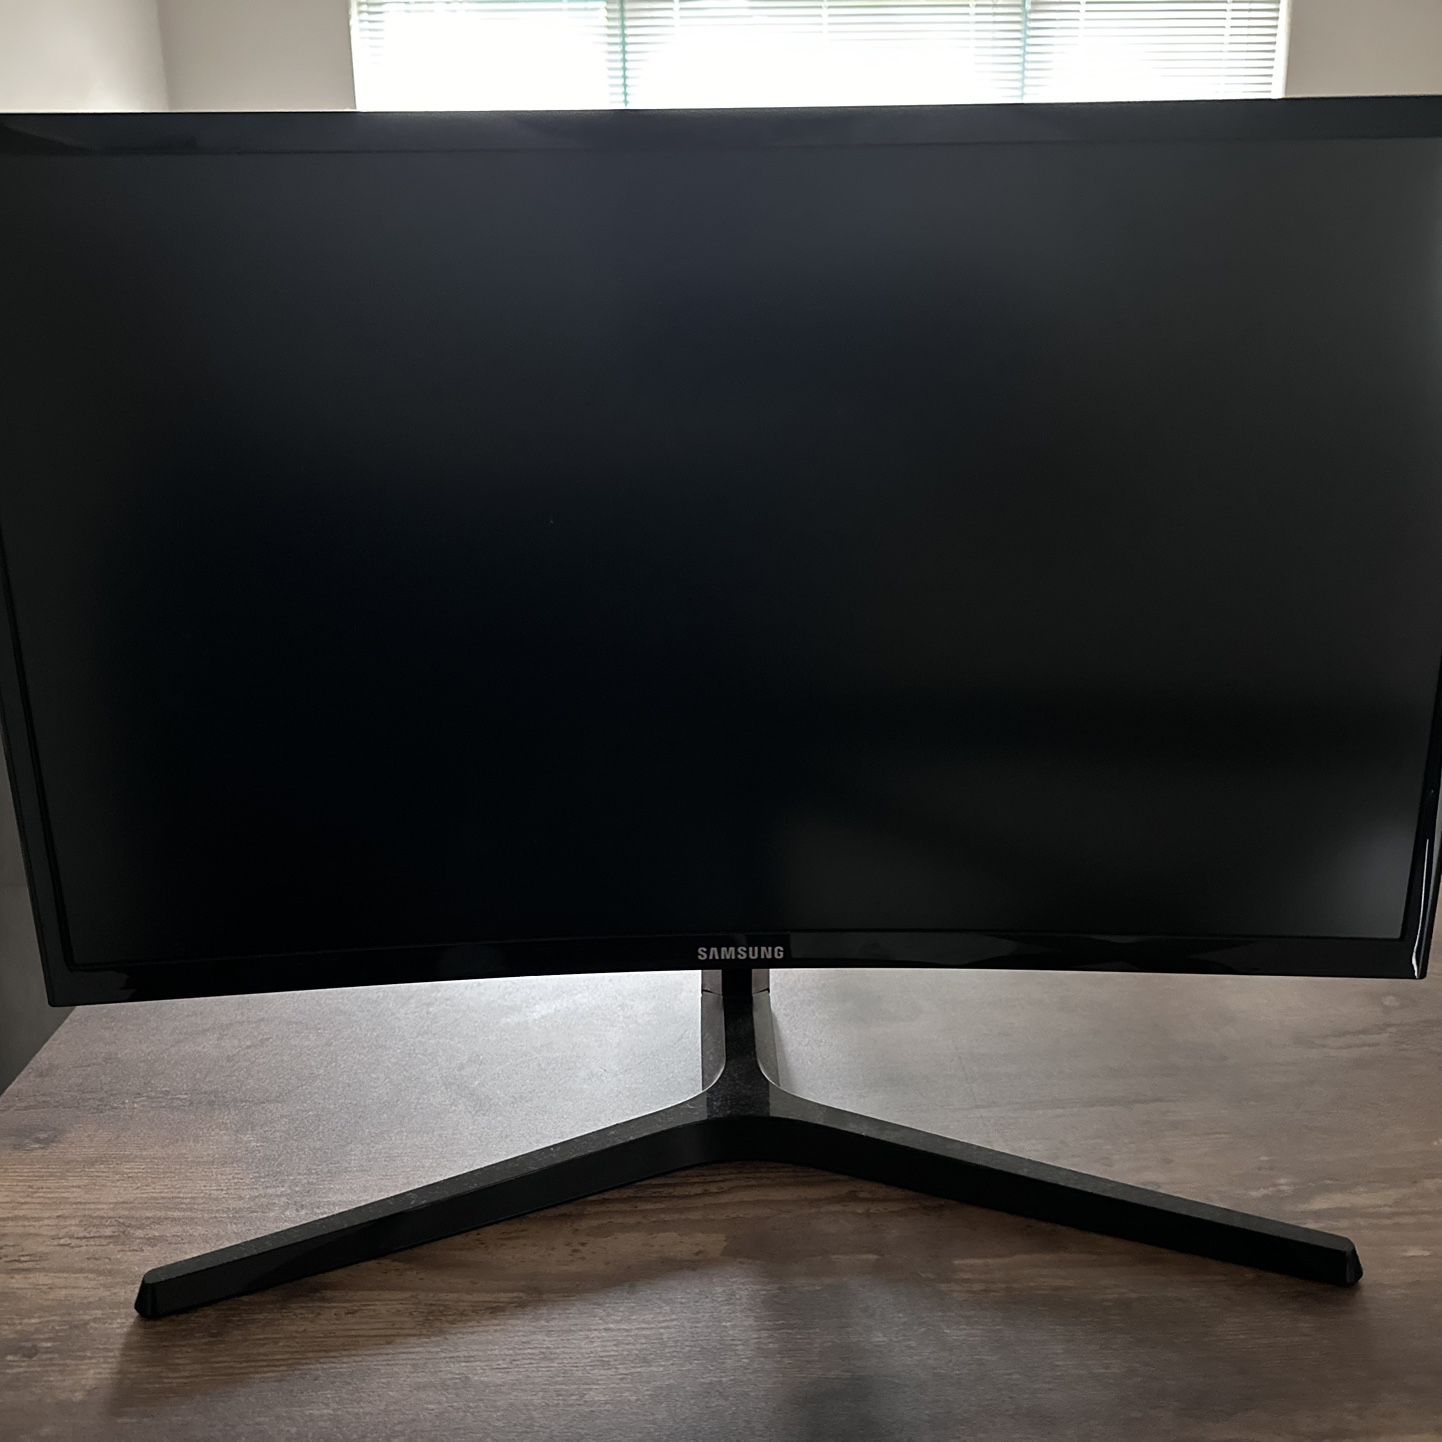 Xbox Series X Year 2020 And 24” Monitor